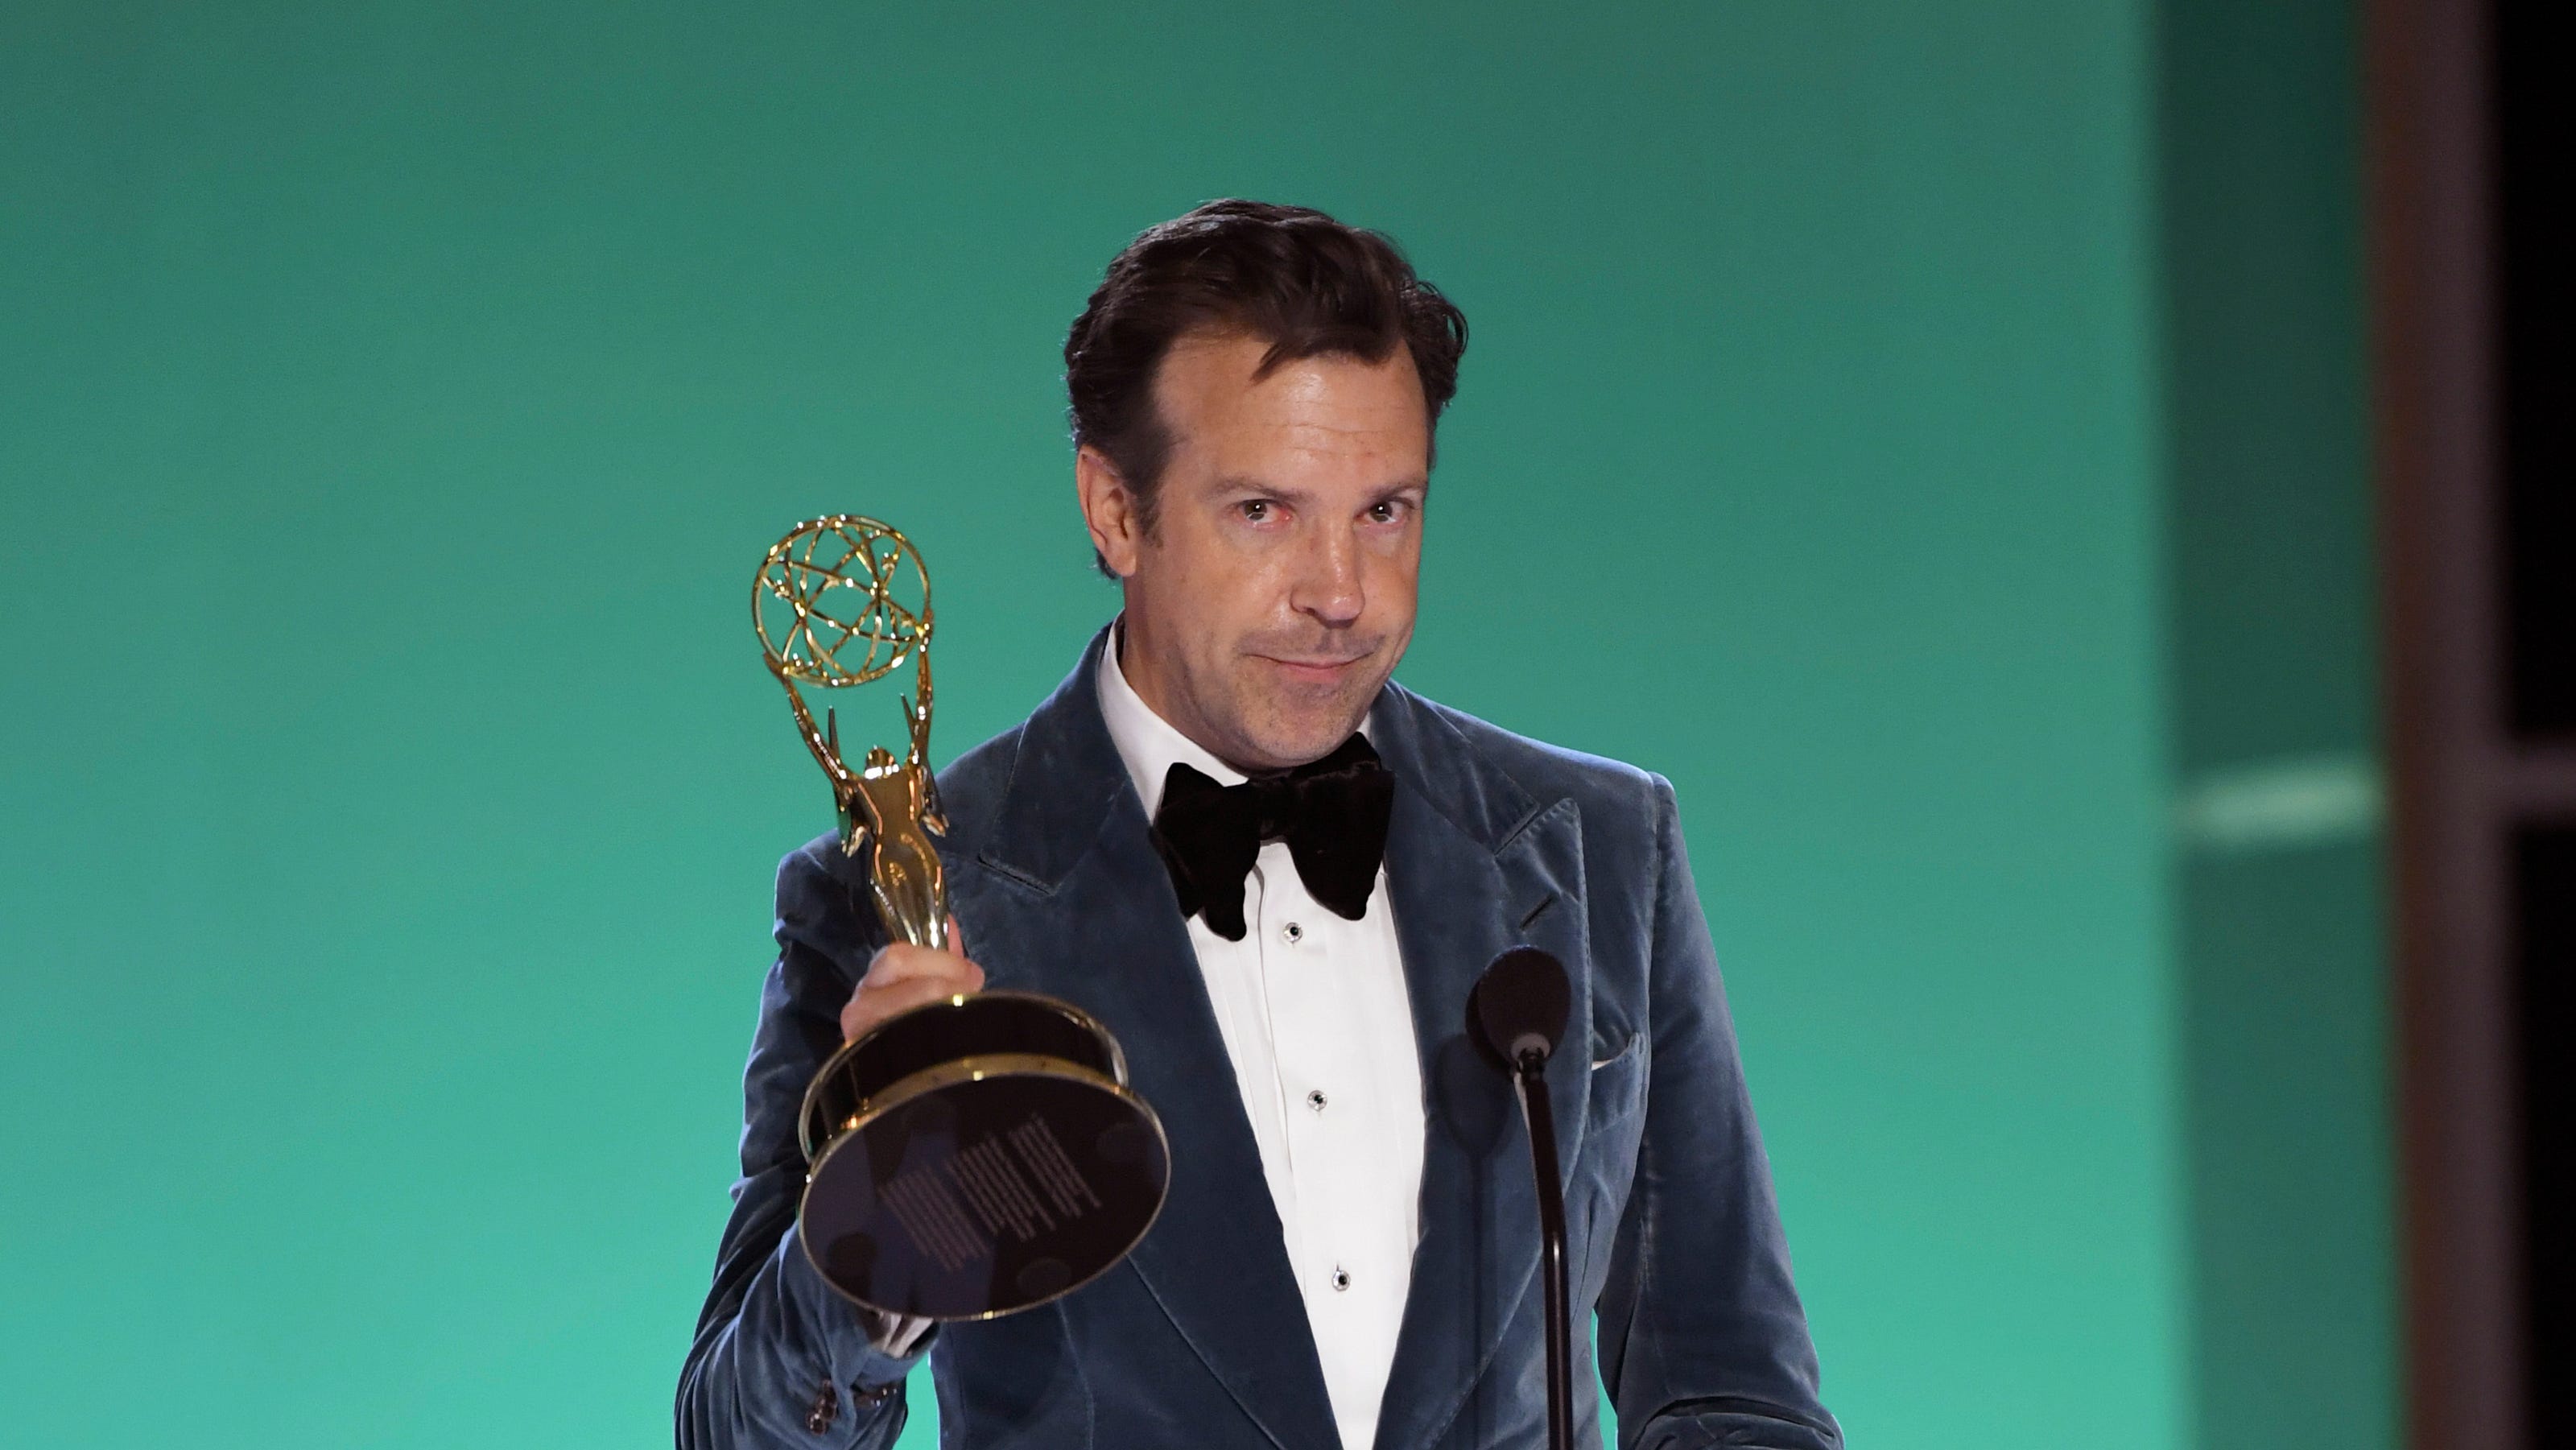 Emmys 2021 Winners Who Won Ted Lasso The Crown Score Big 3579